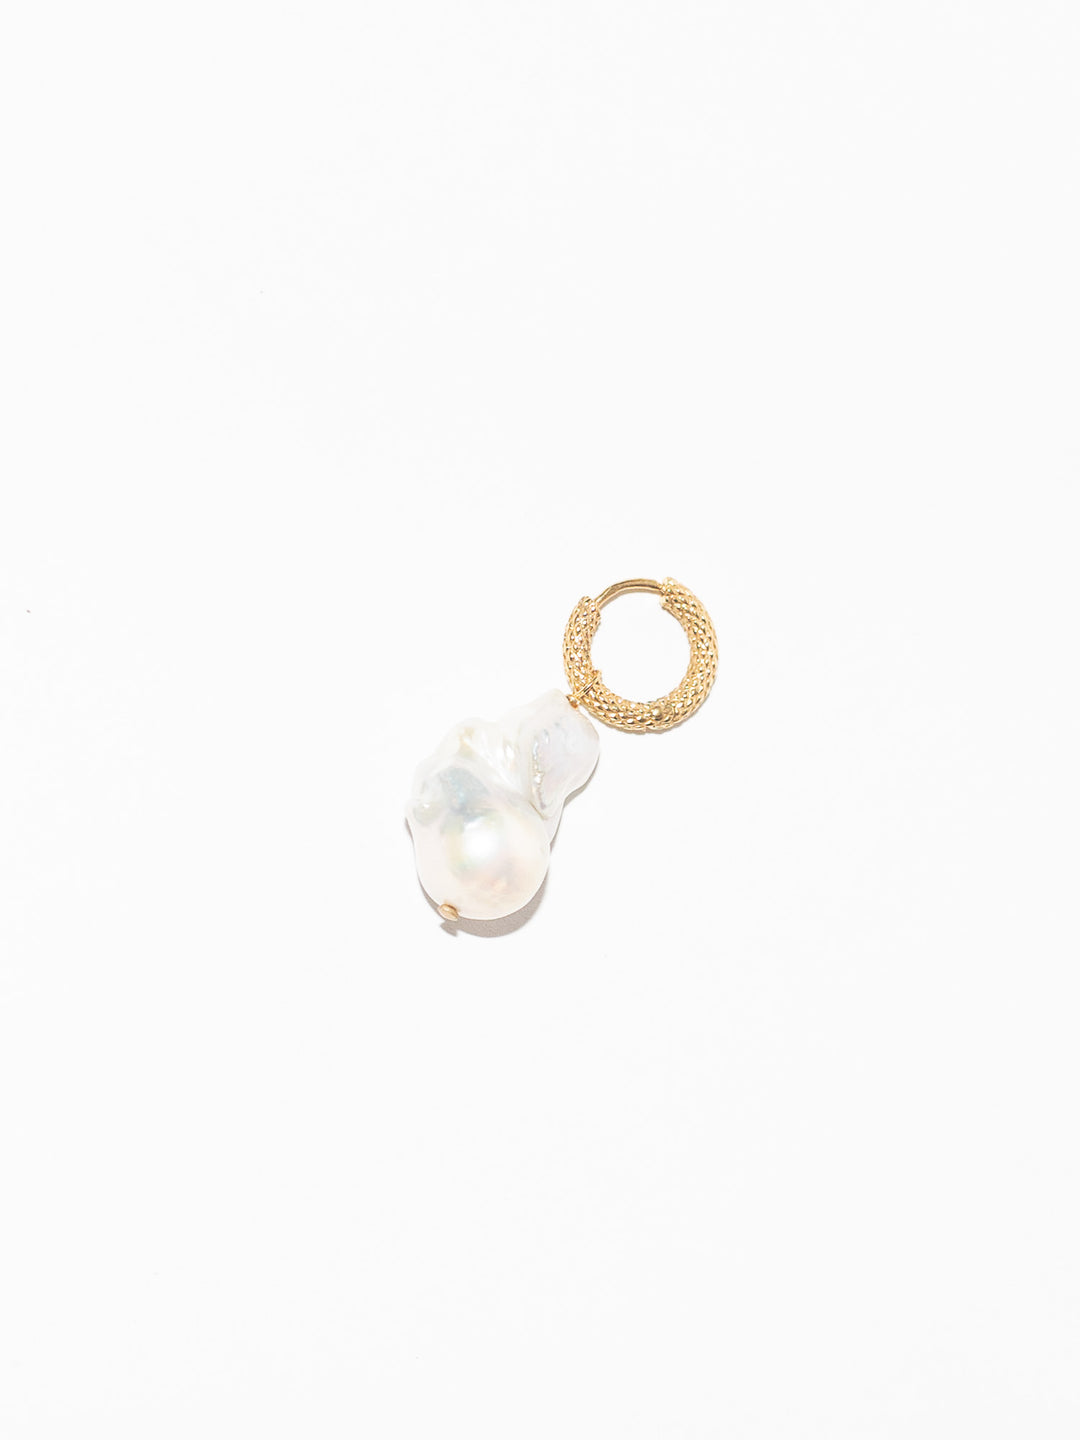 SINGLE GOLD PEARL EARRING AND PENDANT